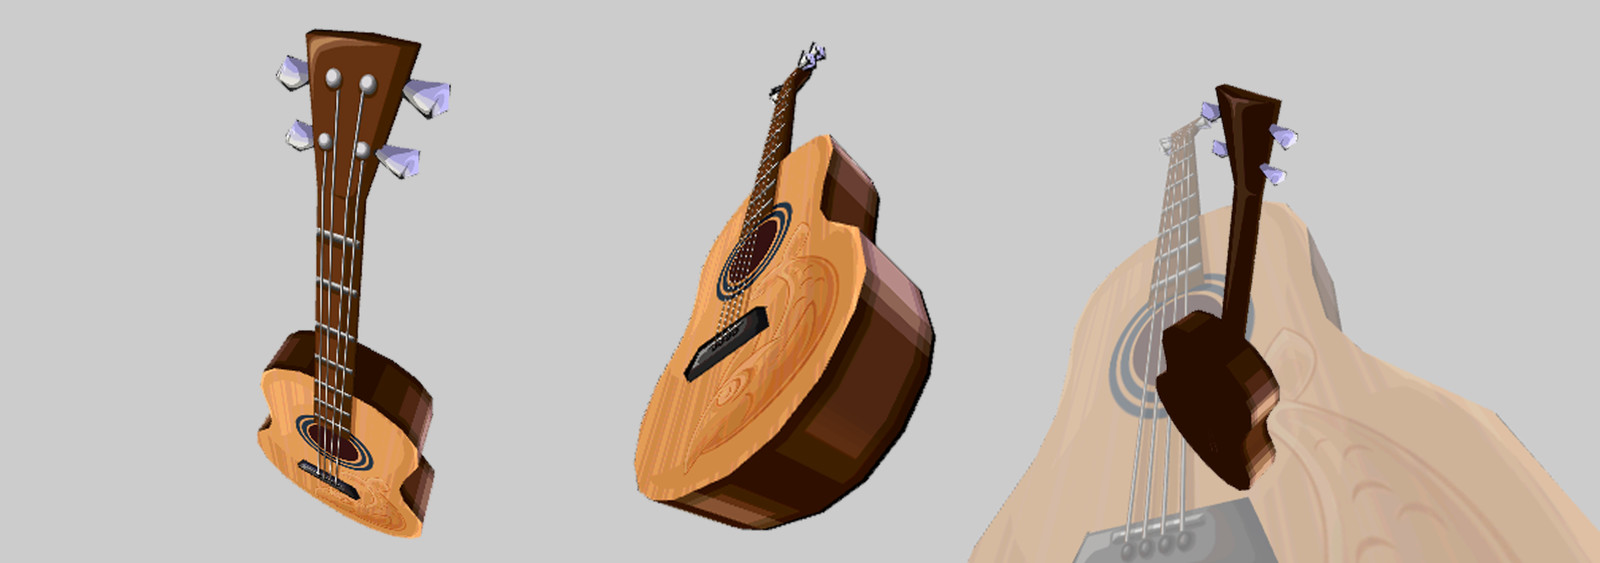 Penguin Guitar Model and texture